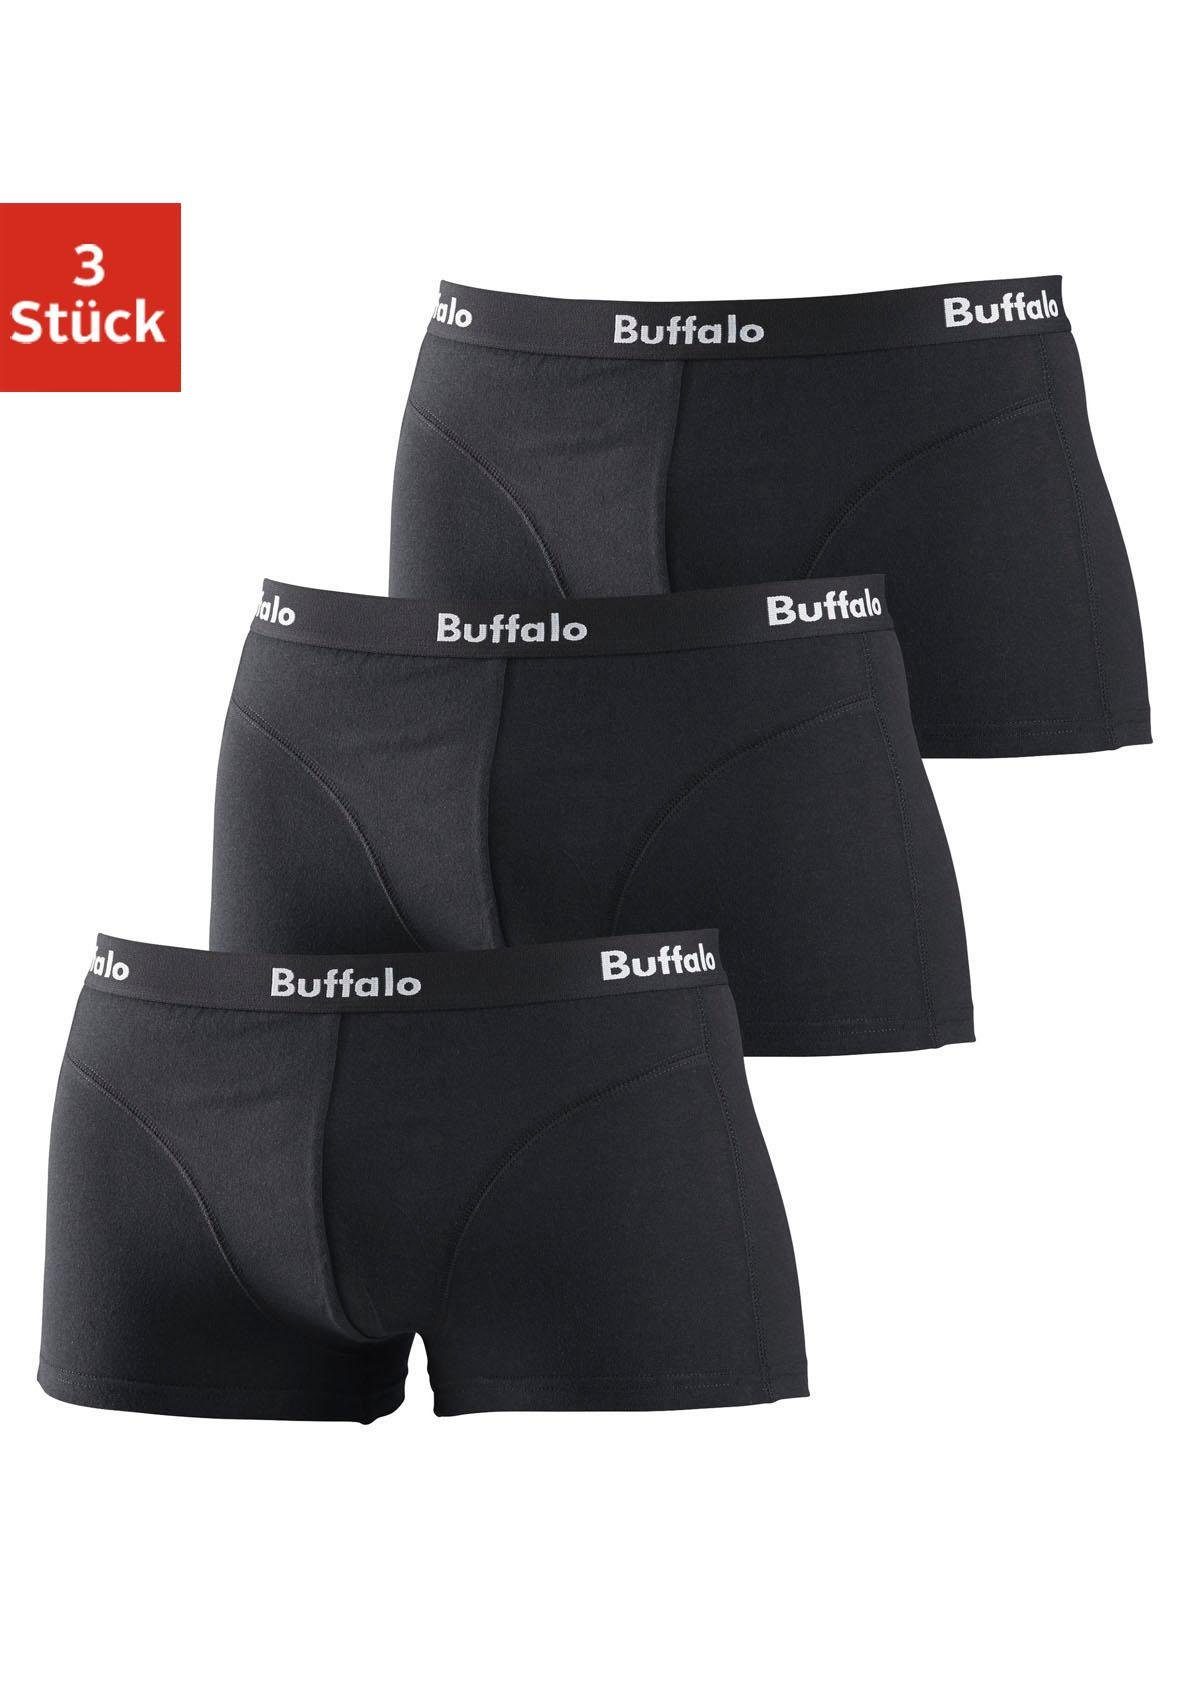 Buffalo Hipster (Packung, 3-St) mit Overlock-Nähten vorn schwarz, schwarz, schwarz | Hipster-Panties